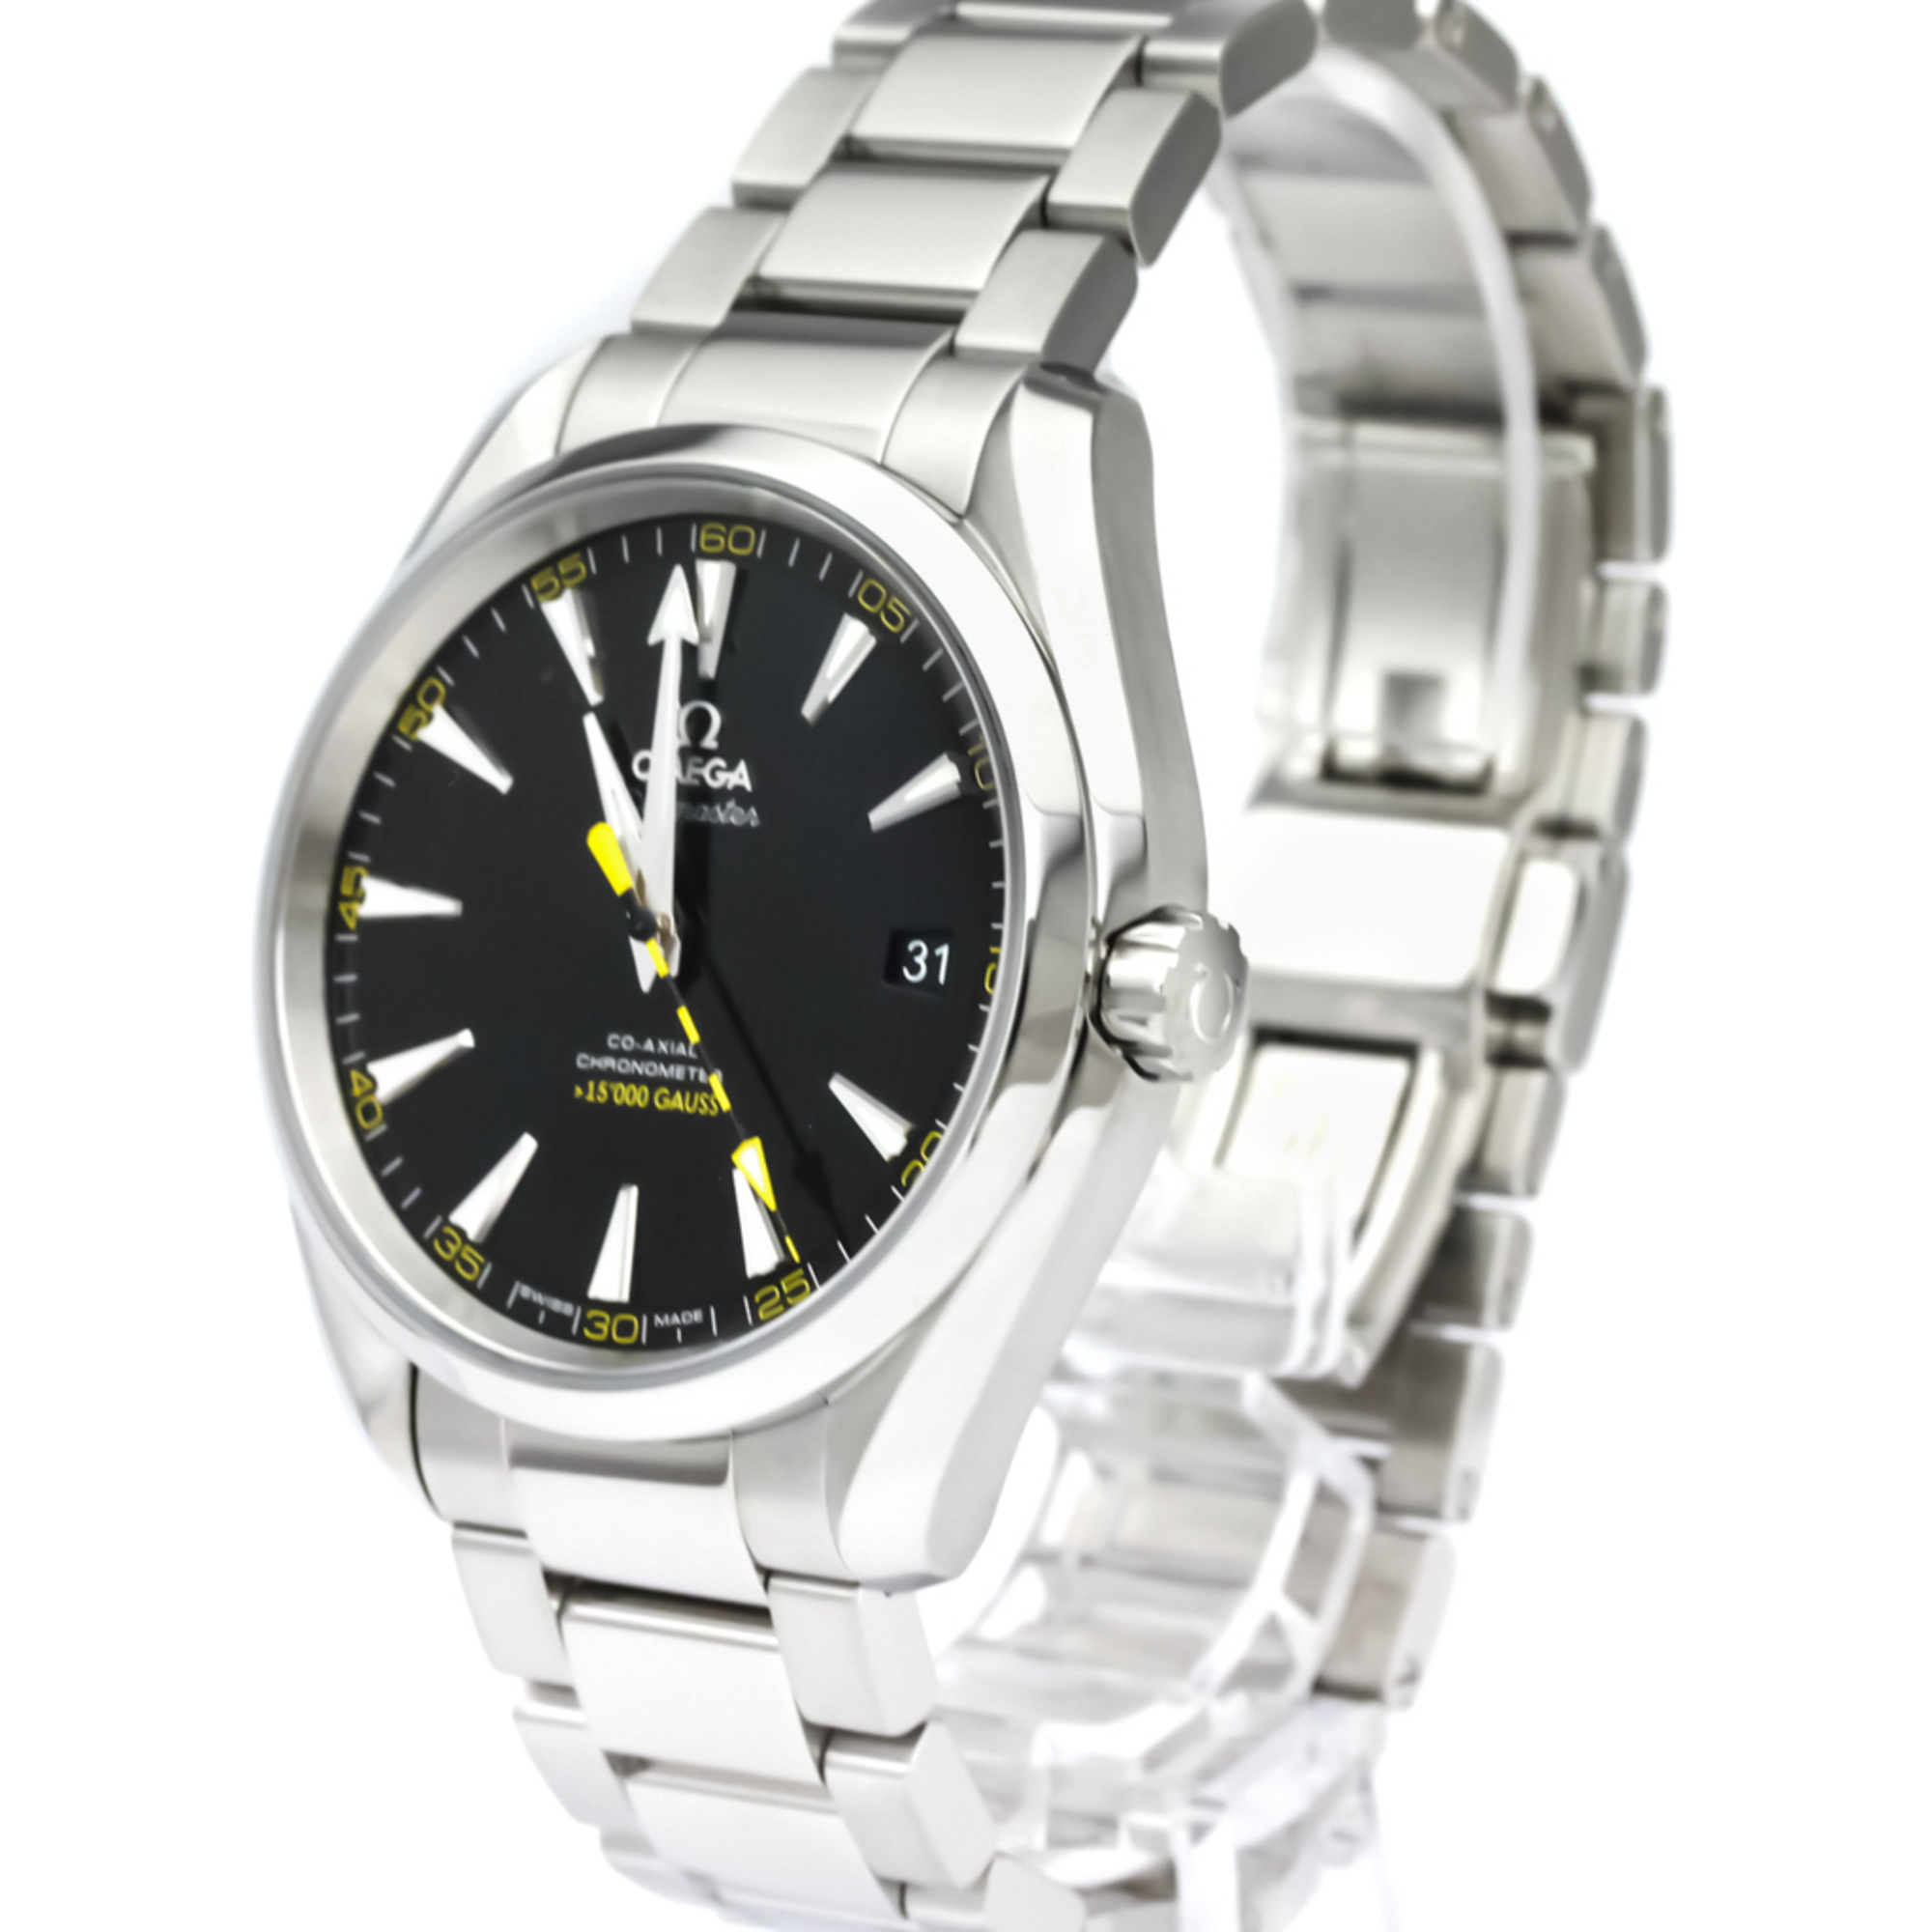 Omega Seamaster Automatic Stainless Steel Men's Sports Watch 231.10.42.21.01.002